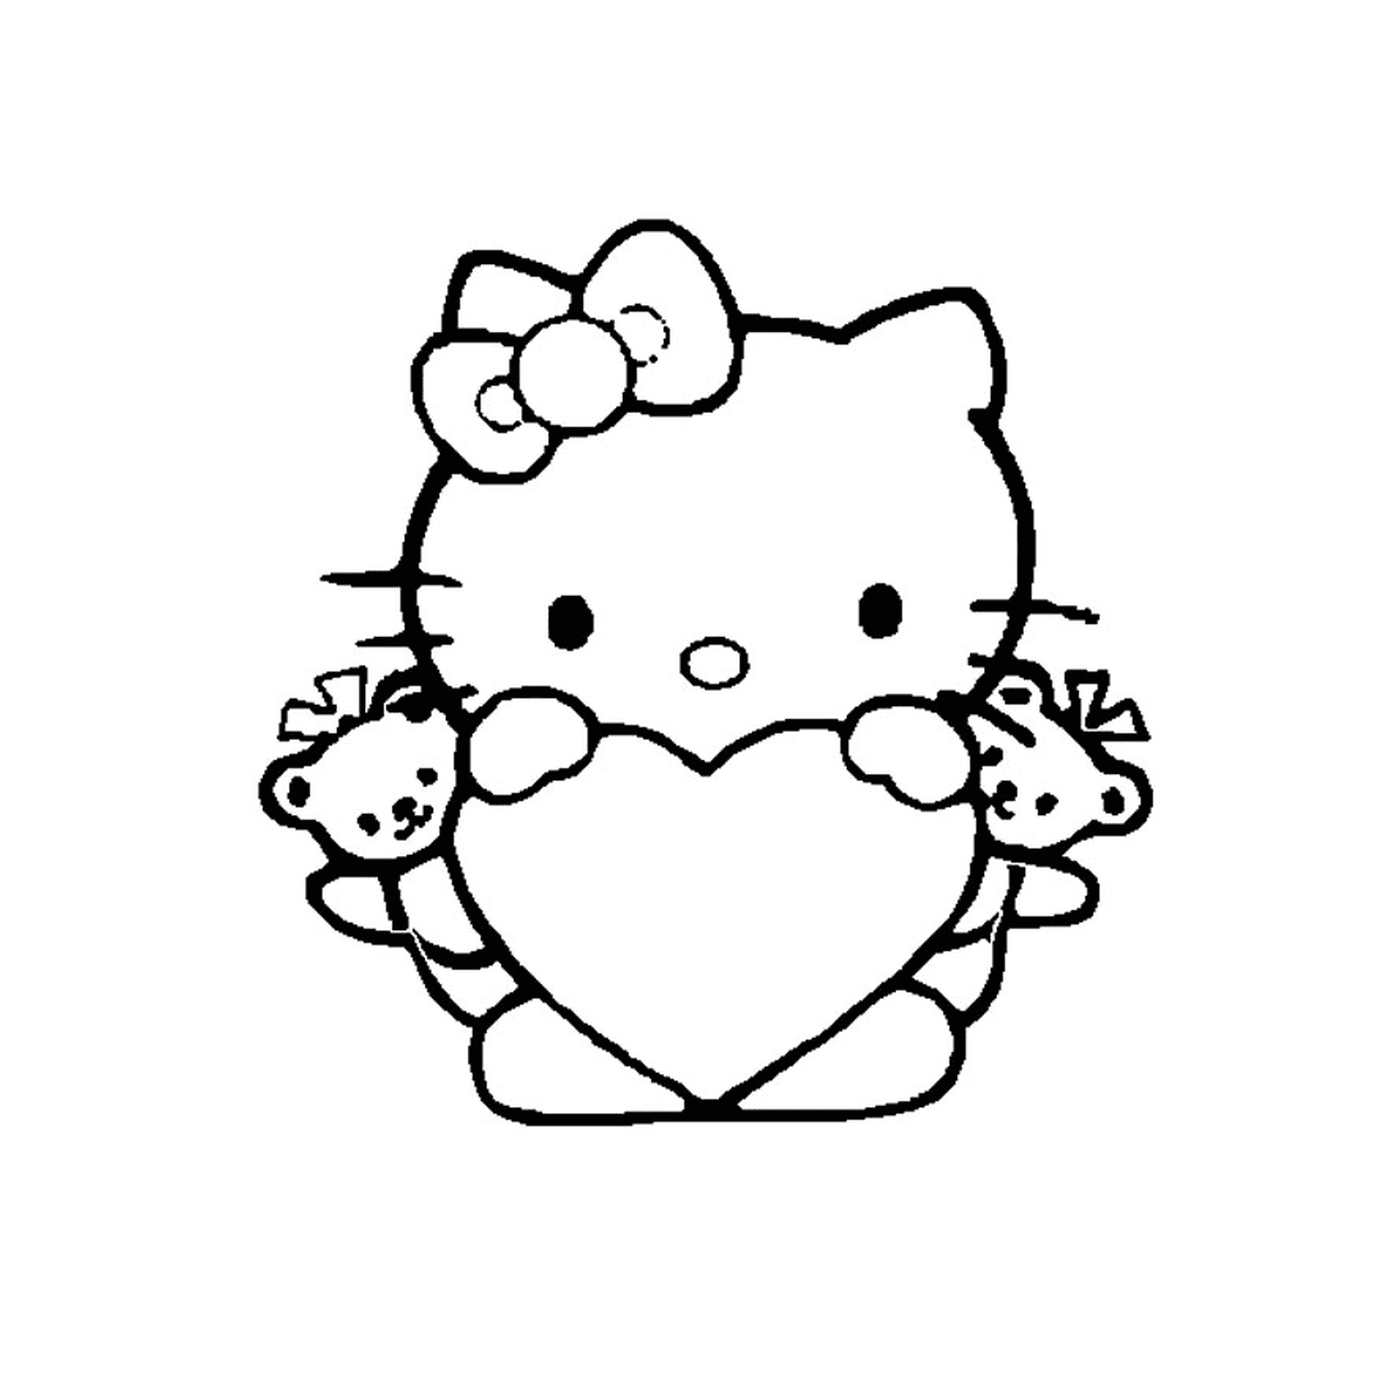  Hello Kitty holding a teddy bear in her arms 